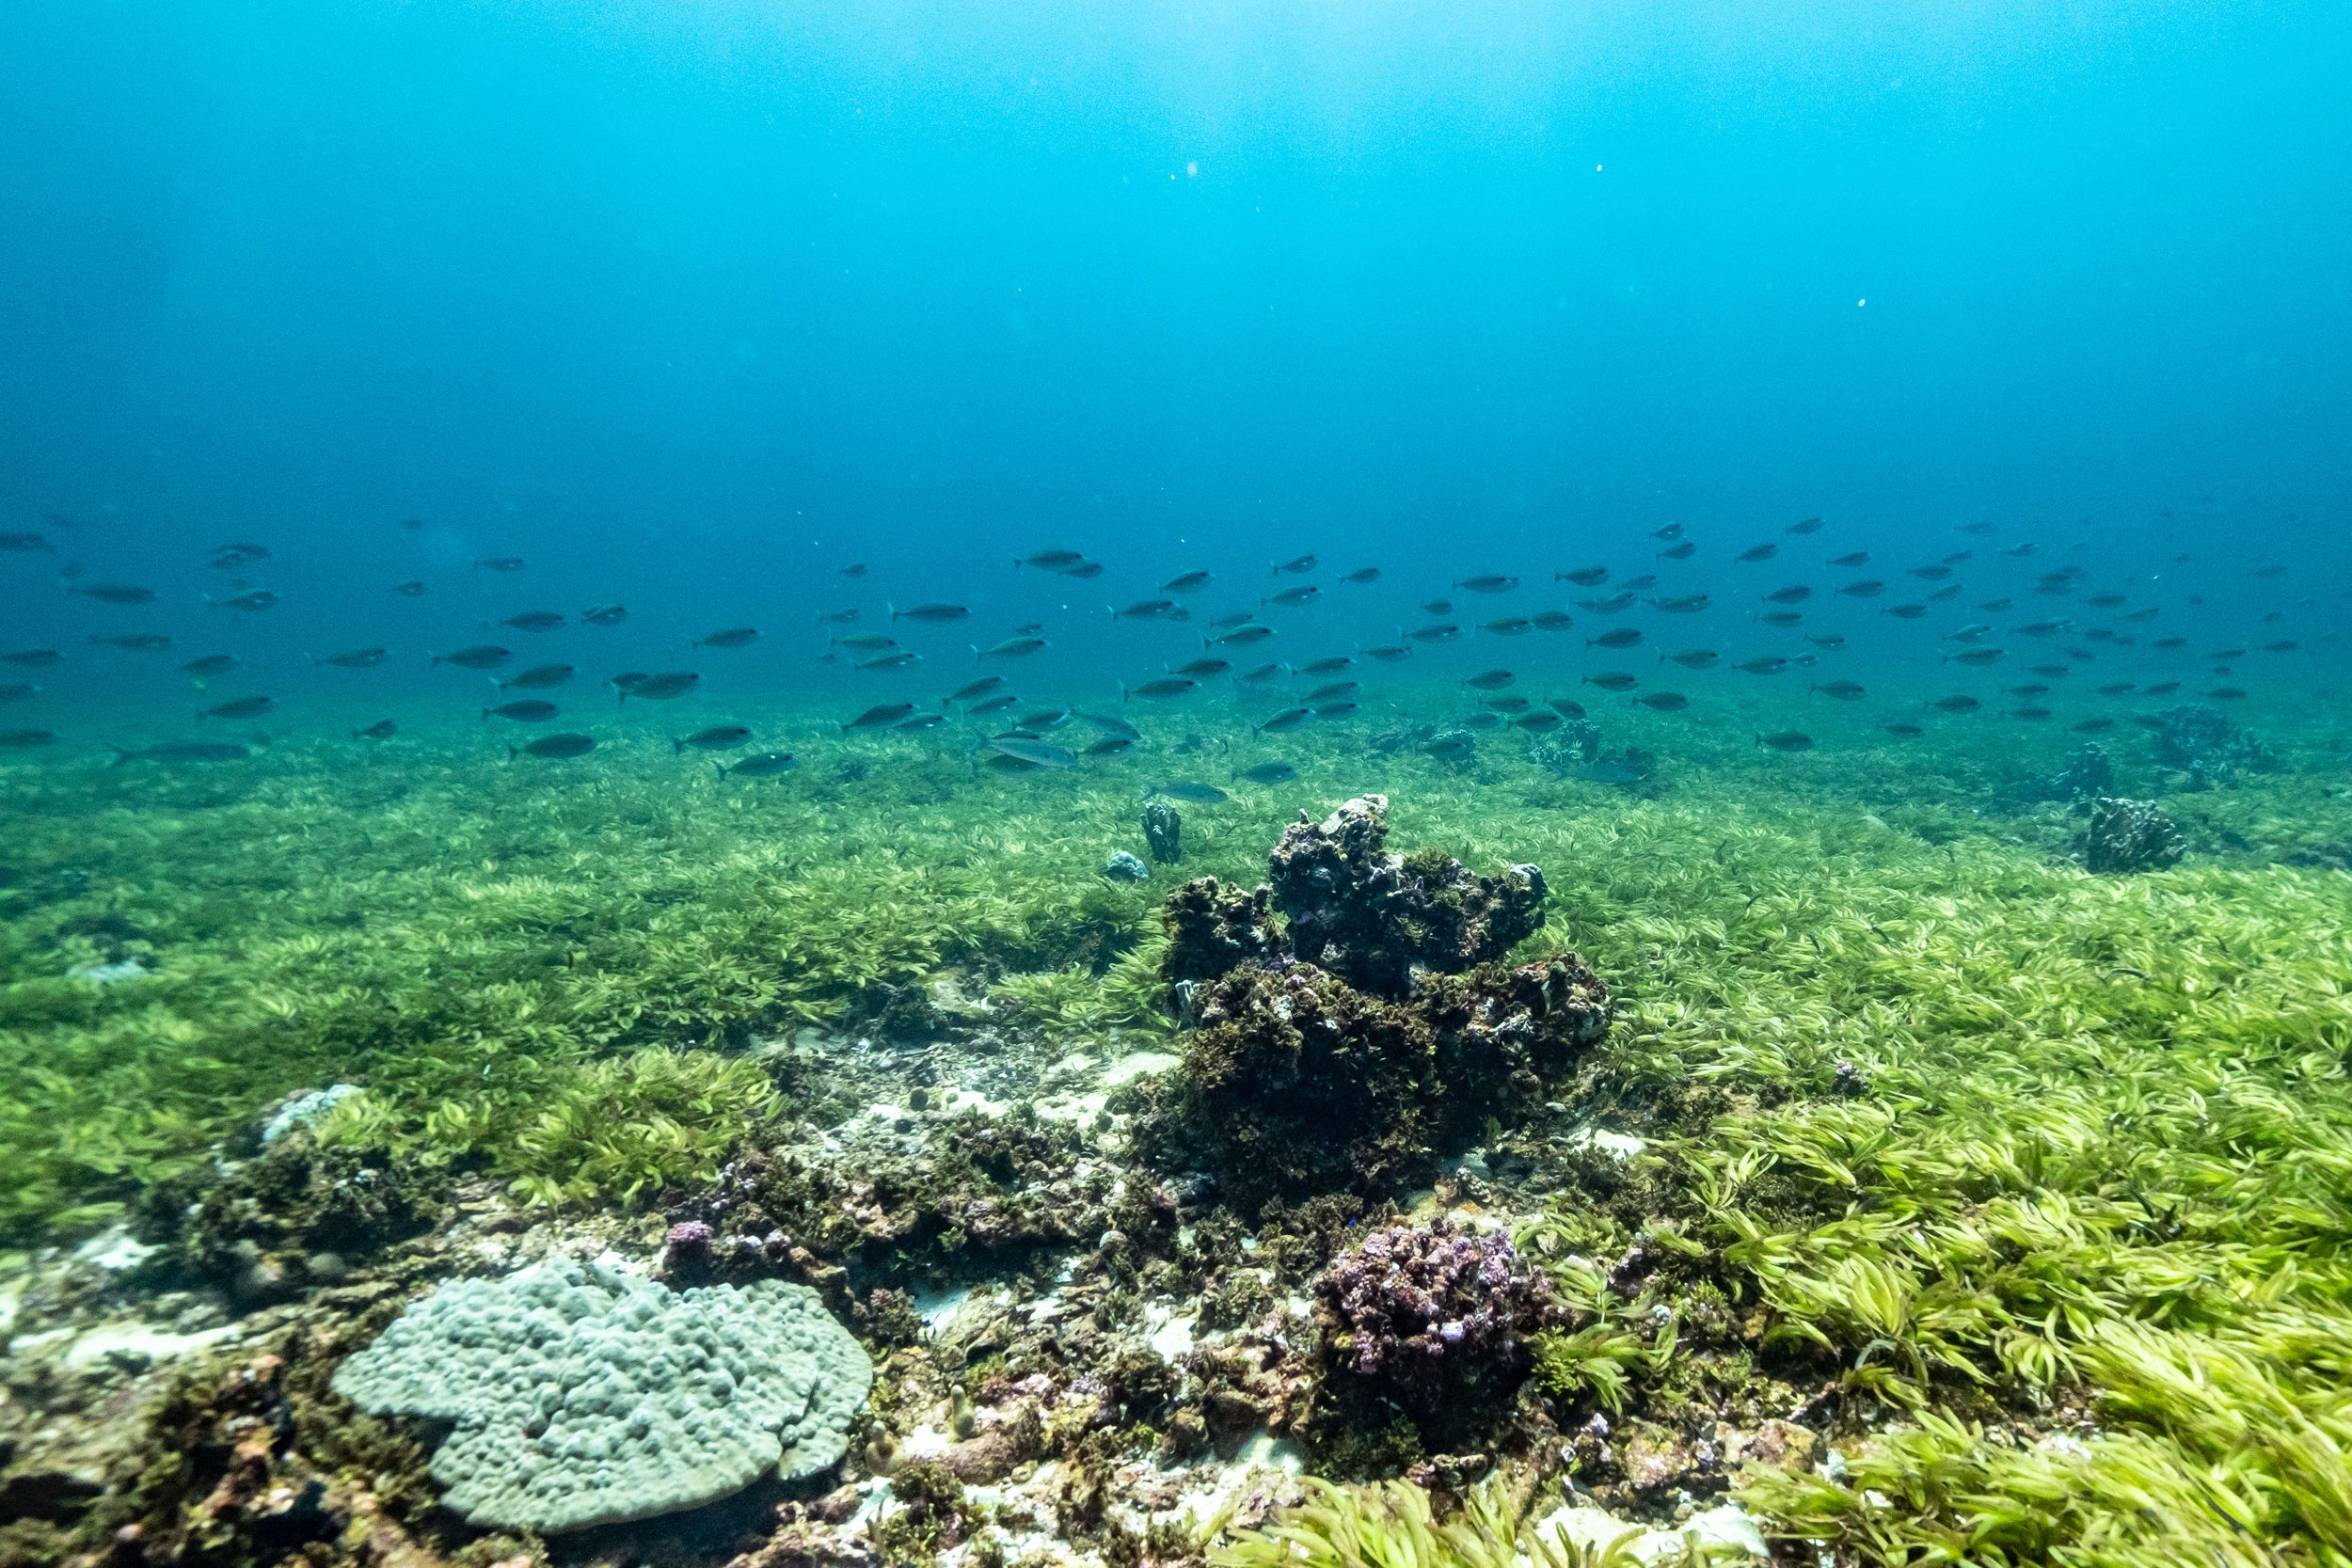 Seagrass and corals on the Saya de Malha Bank